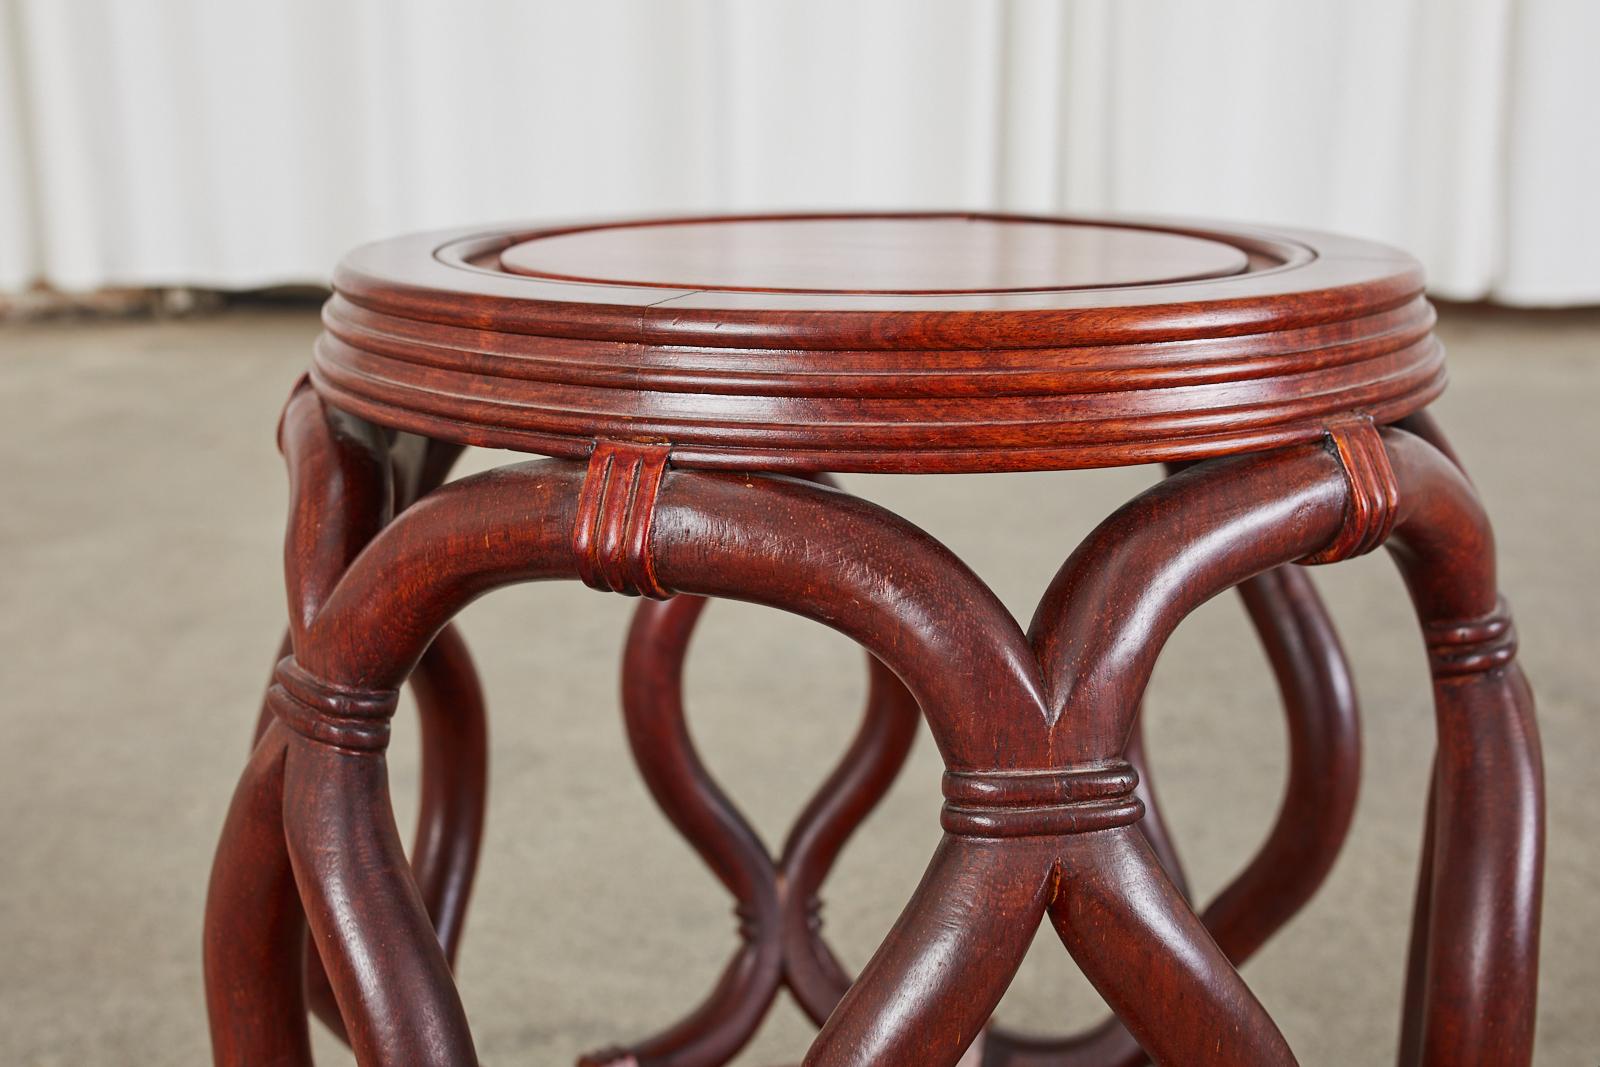 Chinese Export Hardwood Garden Stool or Drinks Table 2